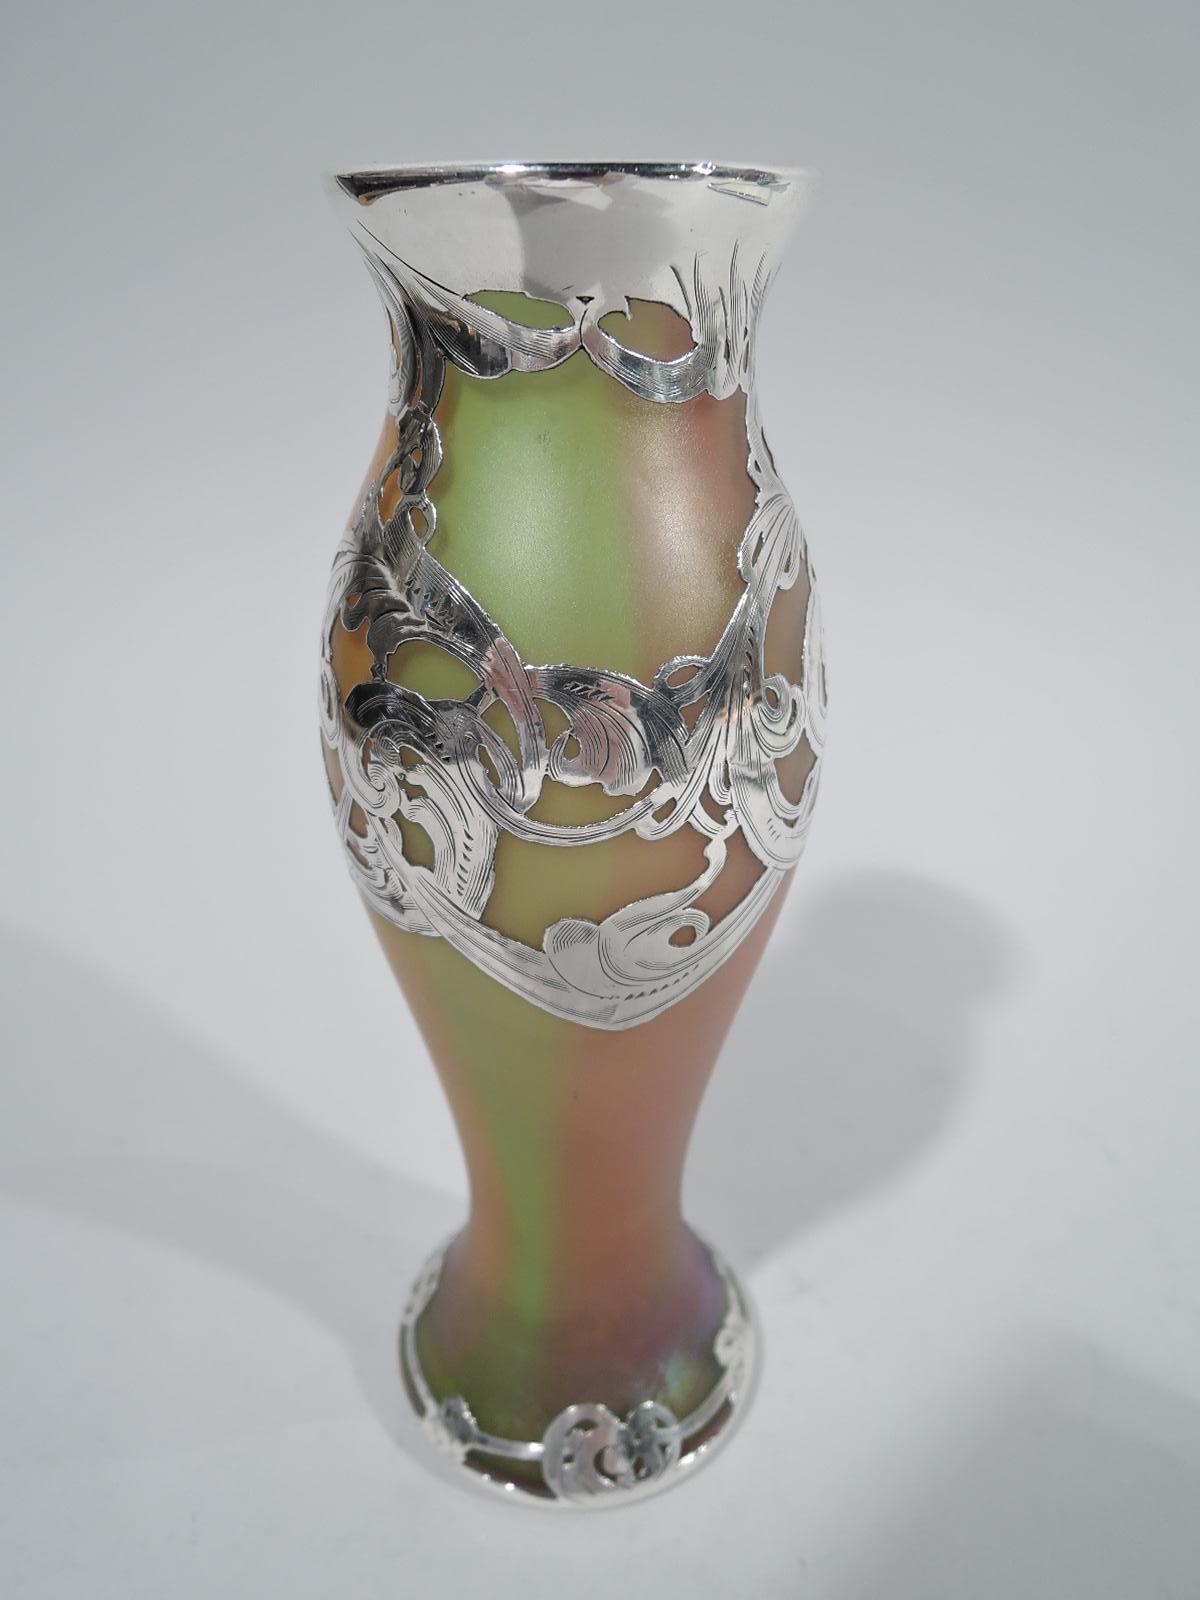 Turn-of-the-century Art Nouveau glass vase by historic Loetz with engraved silver overlay. Baluster with flared mouth and spread foot. Rinceaux overlay with pendant swags, and loosely spaced-out scroll border at foot. Iridescent rainbow glass with